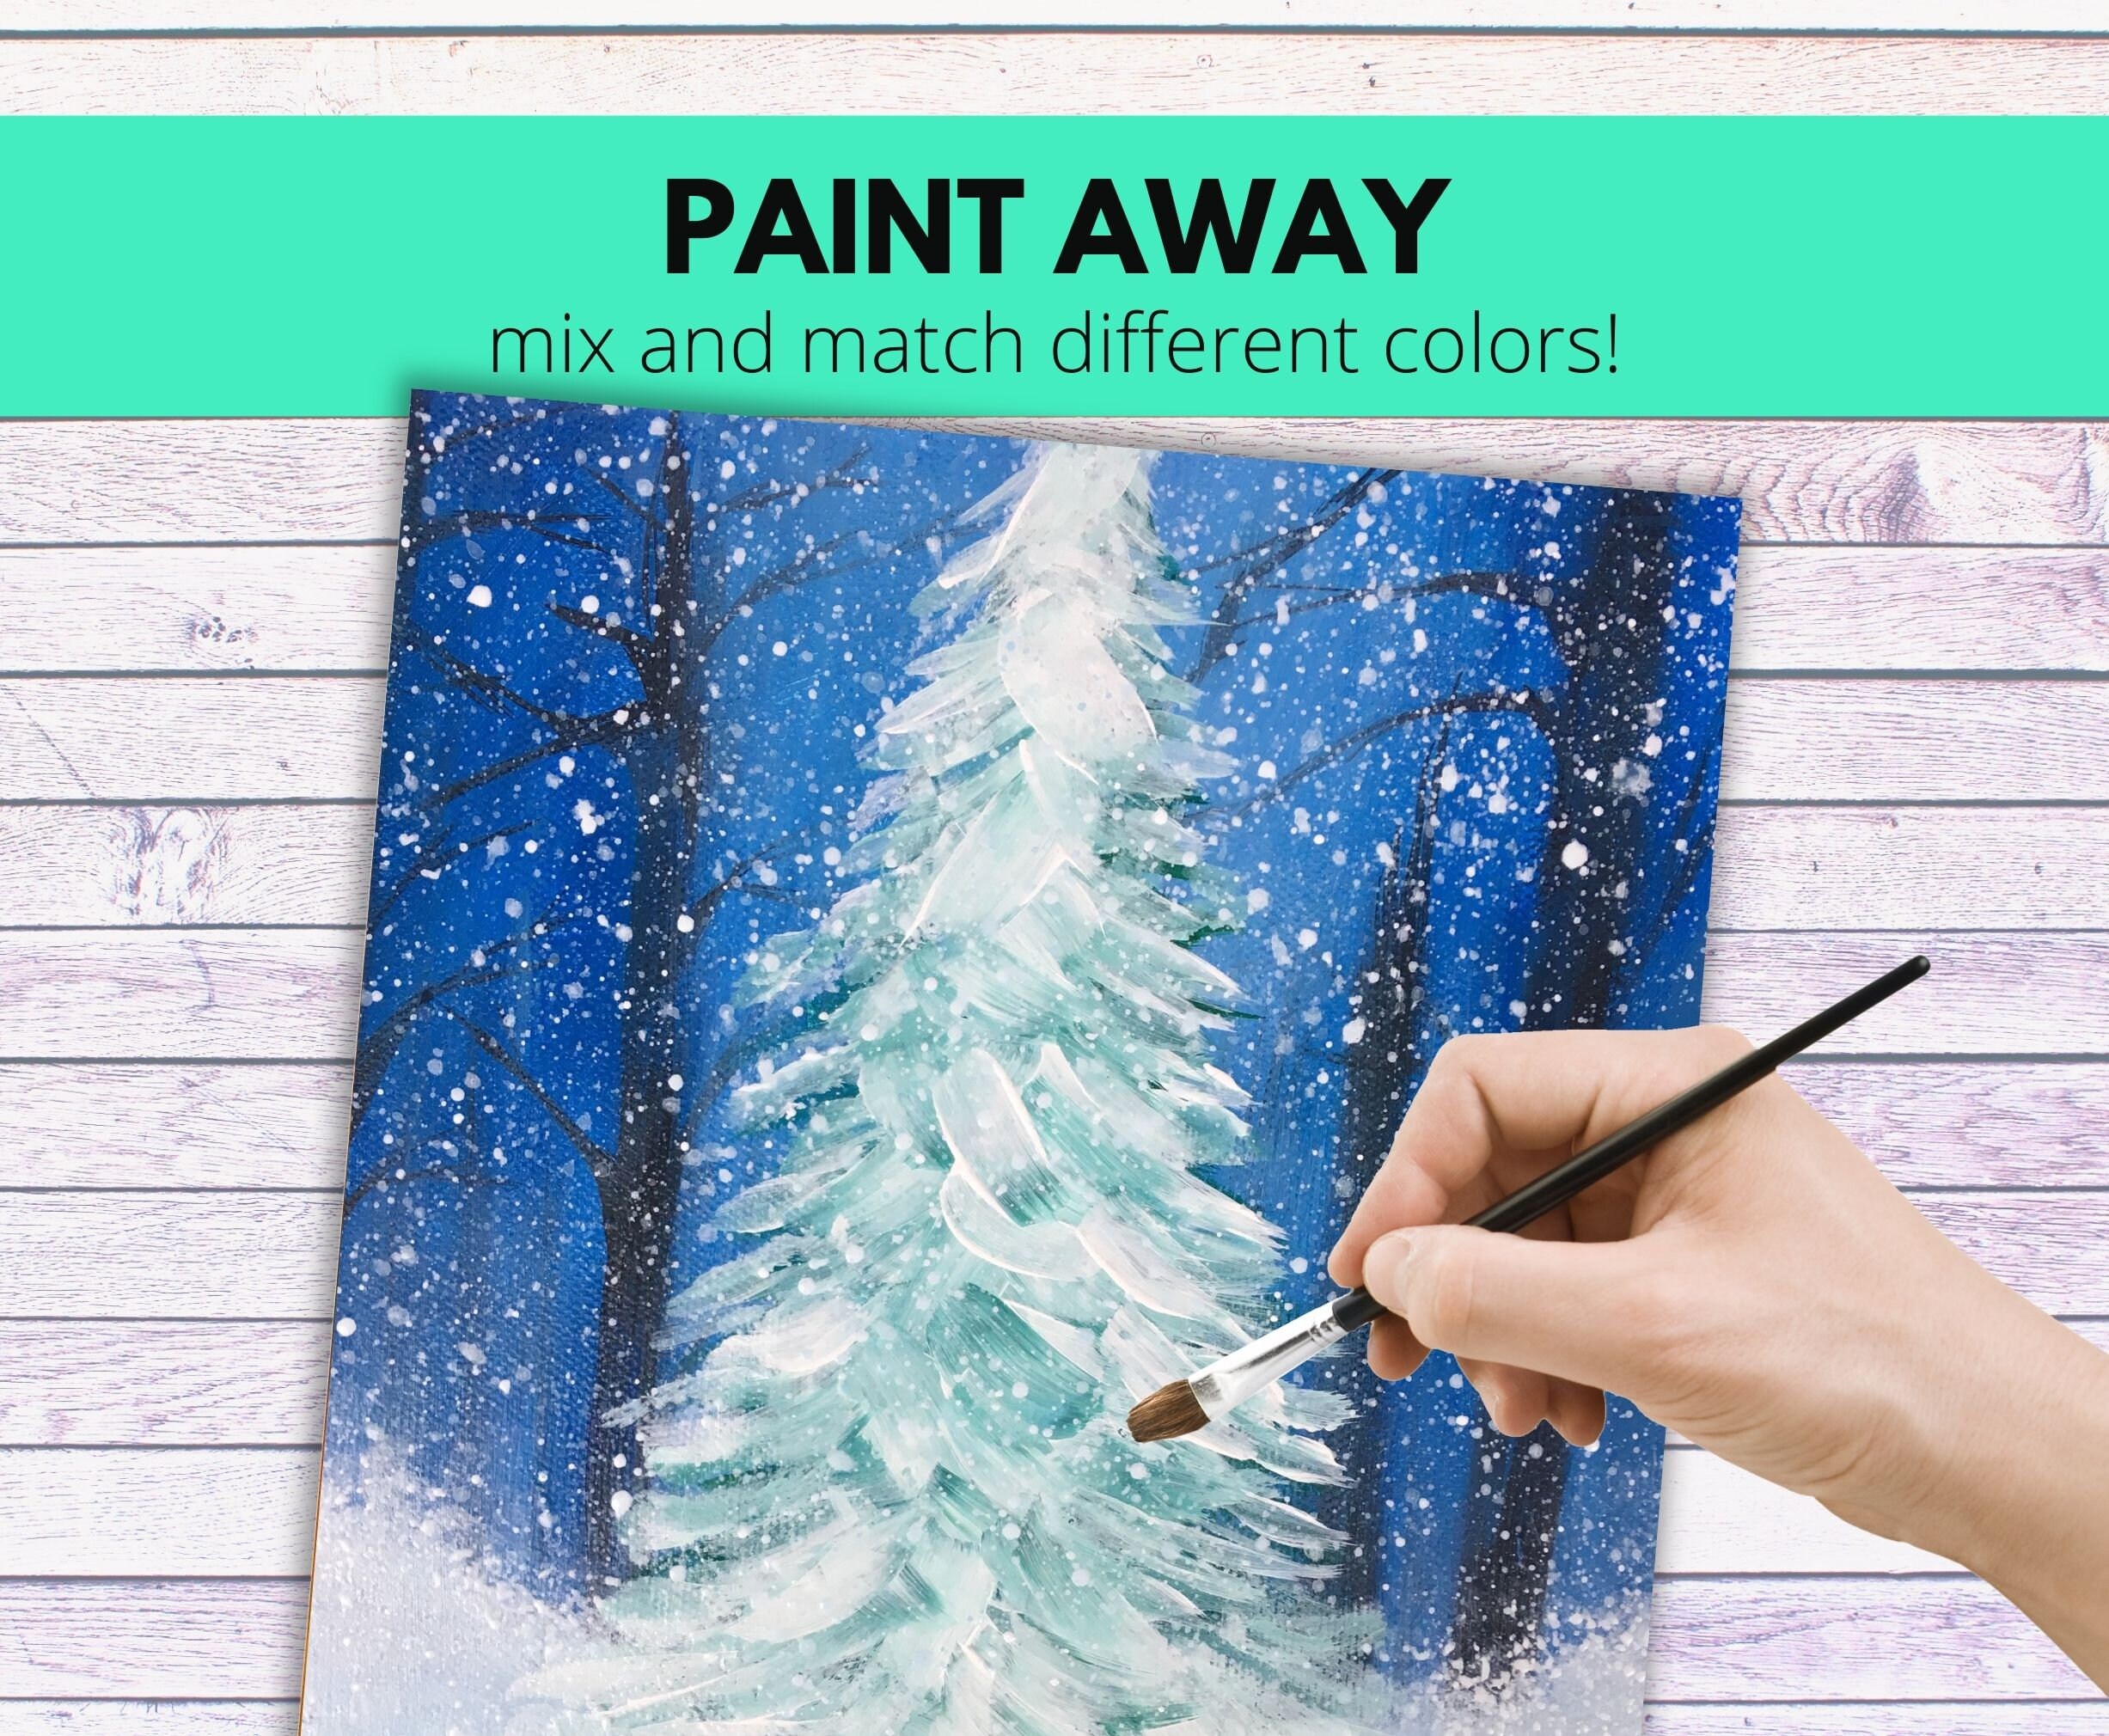 Snowy Christmas Tree Canvas Painting Tutorial, Instant Download, Learn ...